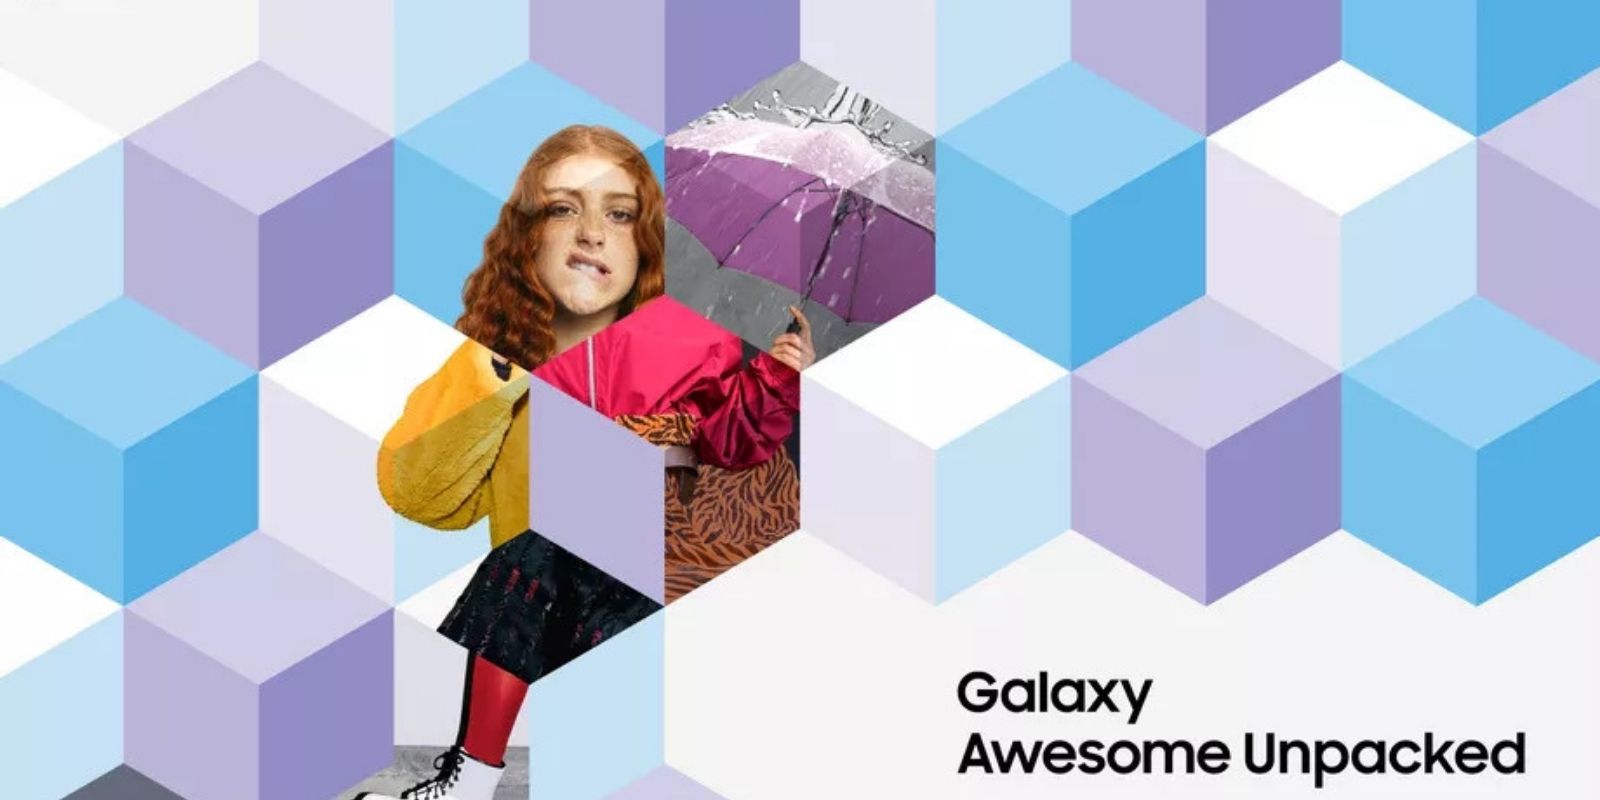 Samsung To Host Another Galaxy Unpacked Event On March 17Th, 2021